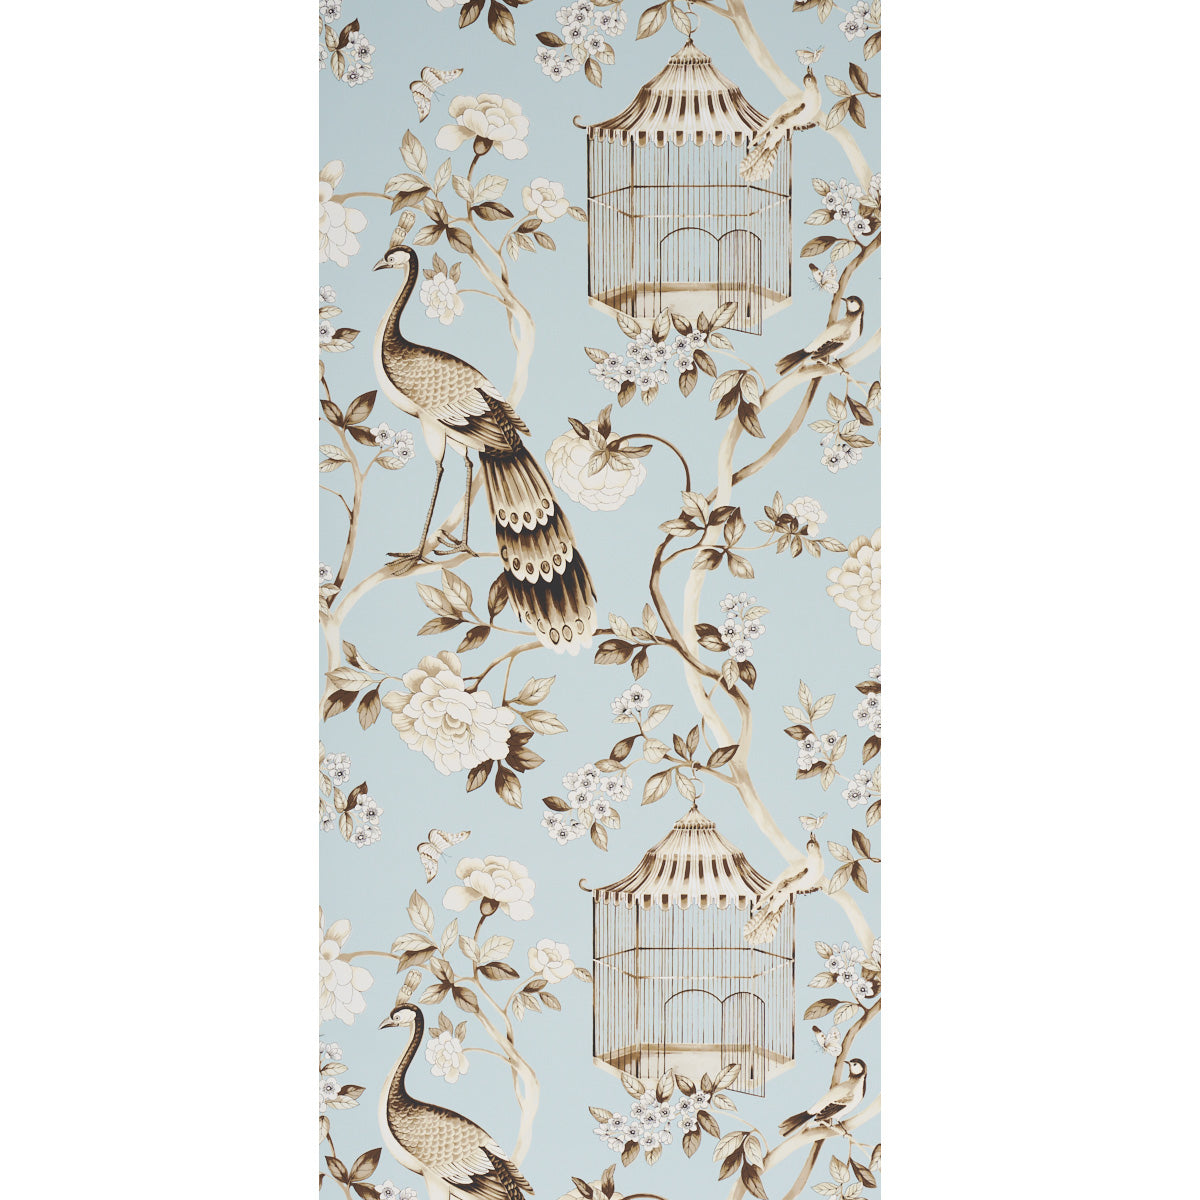 Schumacher Pyne Hollyhock French Country Indigo Industrial Wallpaper   Kathy Kuo Home